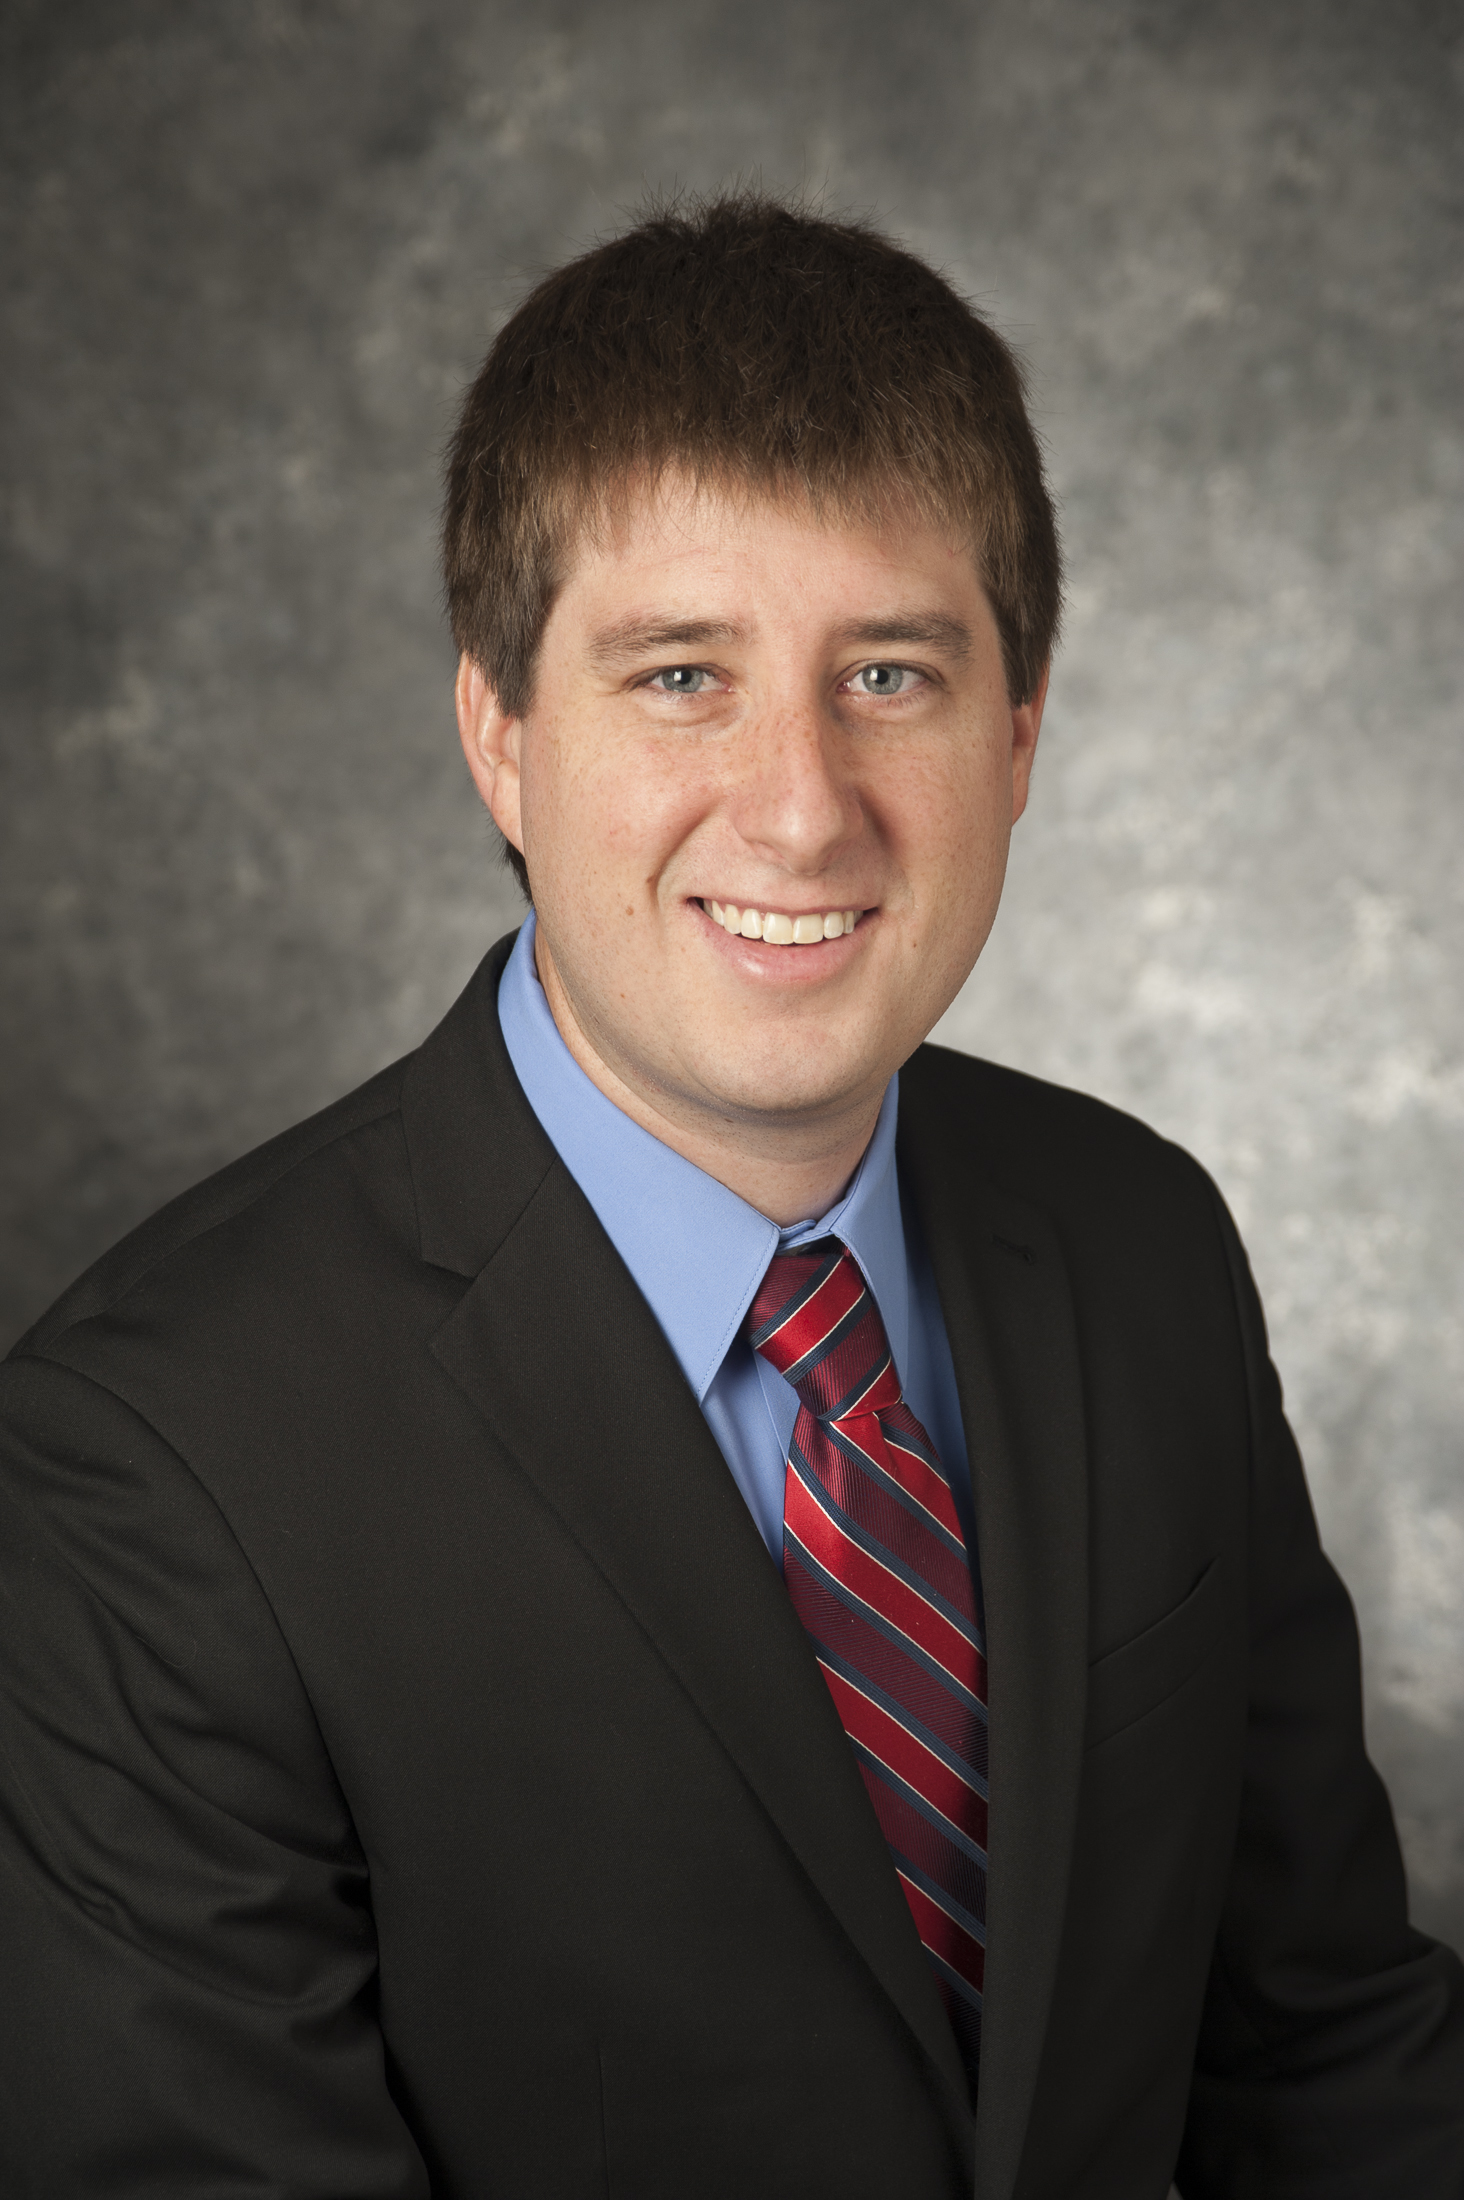 A headshot of Brett Story, a member of the Lyle School of Engineering Faculty.